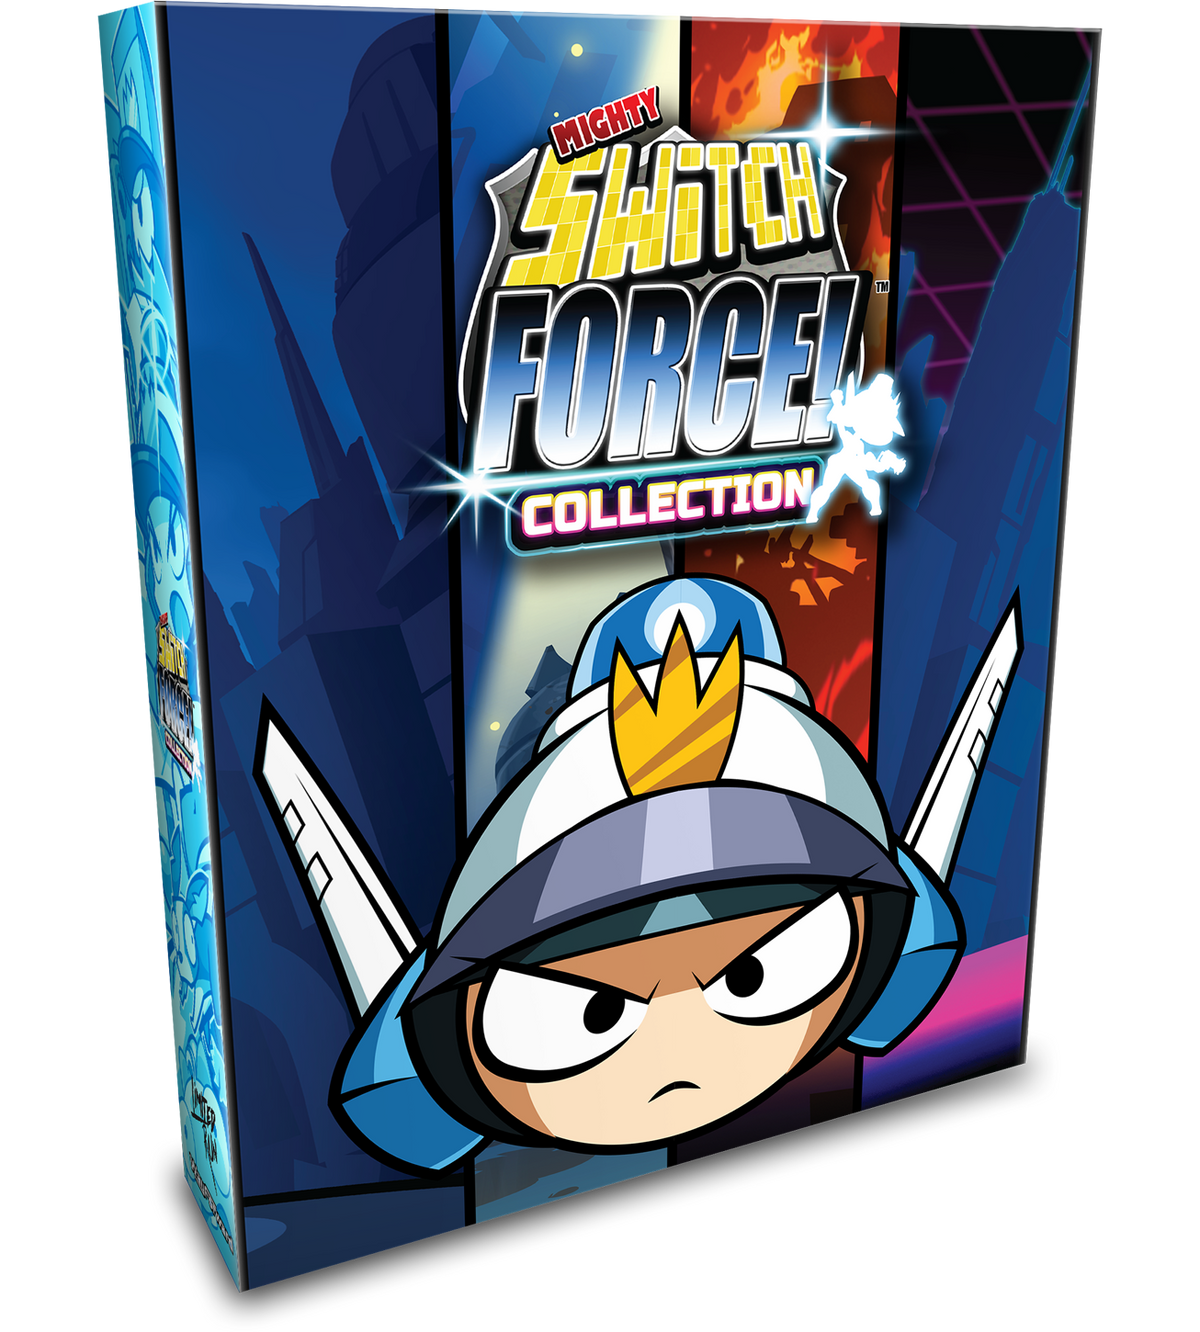 Limited Run #322: Mighty Switch Force! Collection Collector's Edition (PS4)